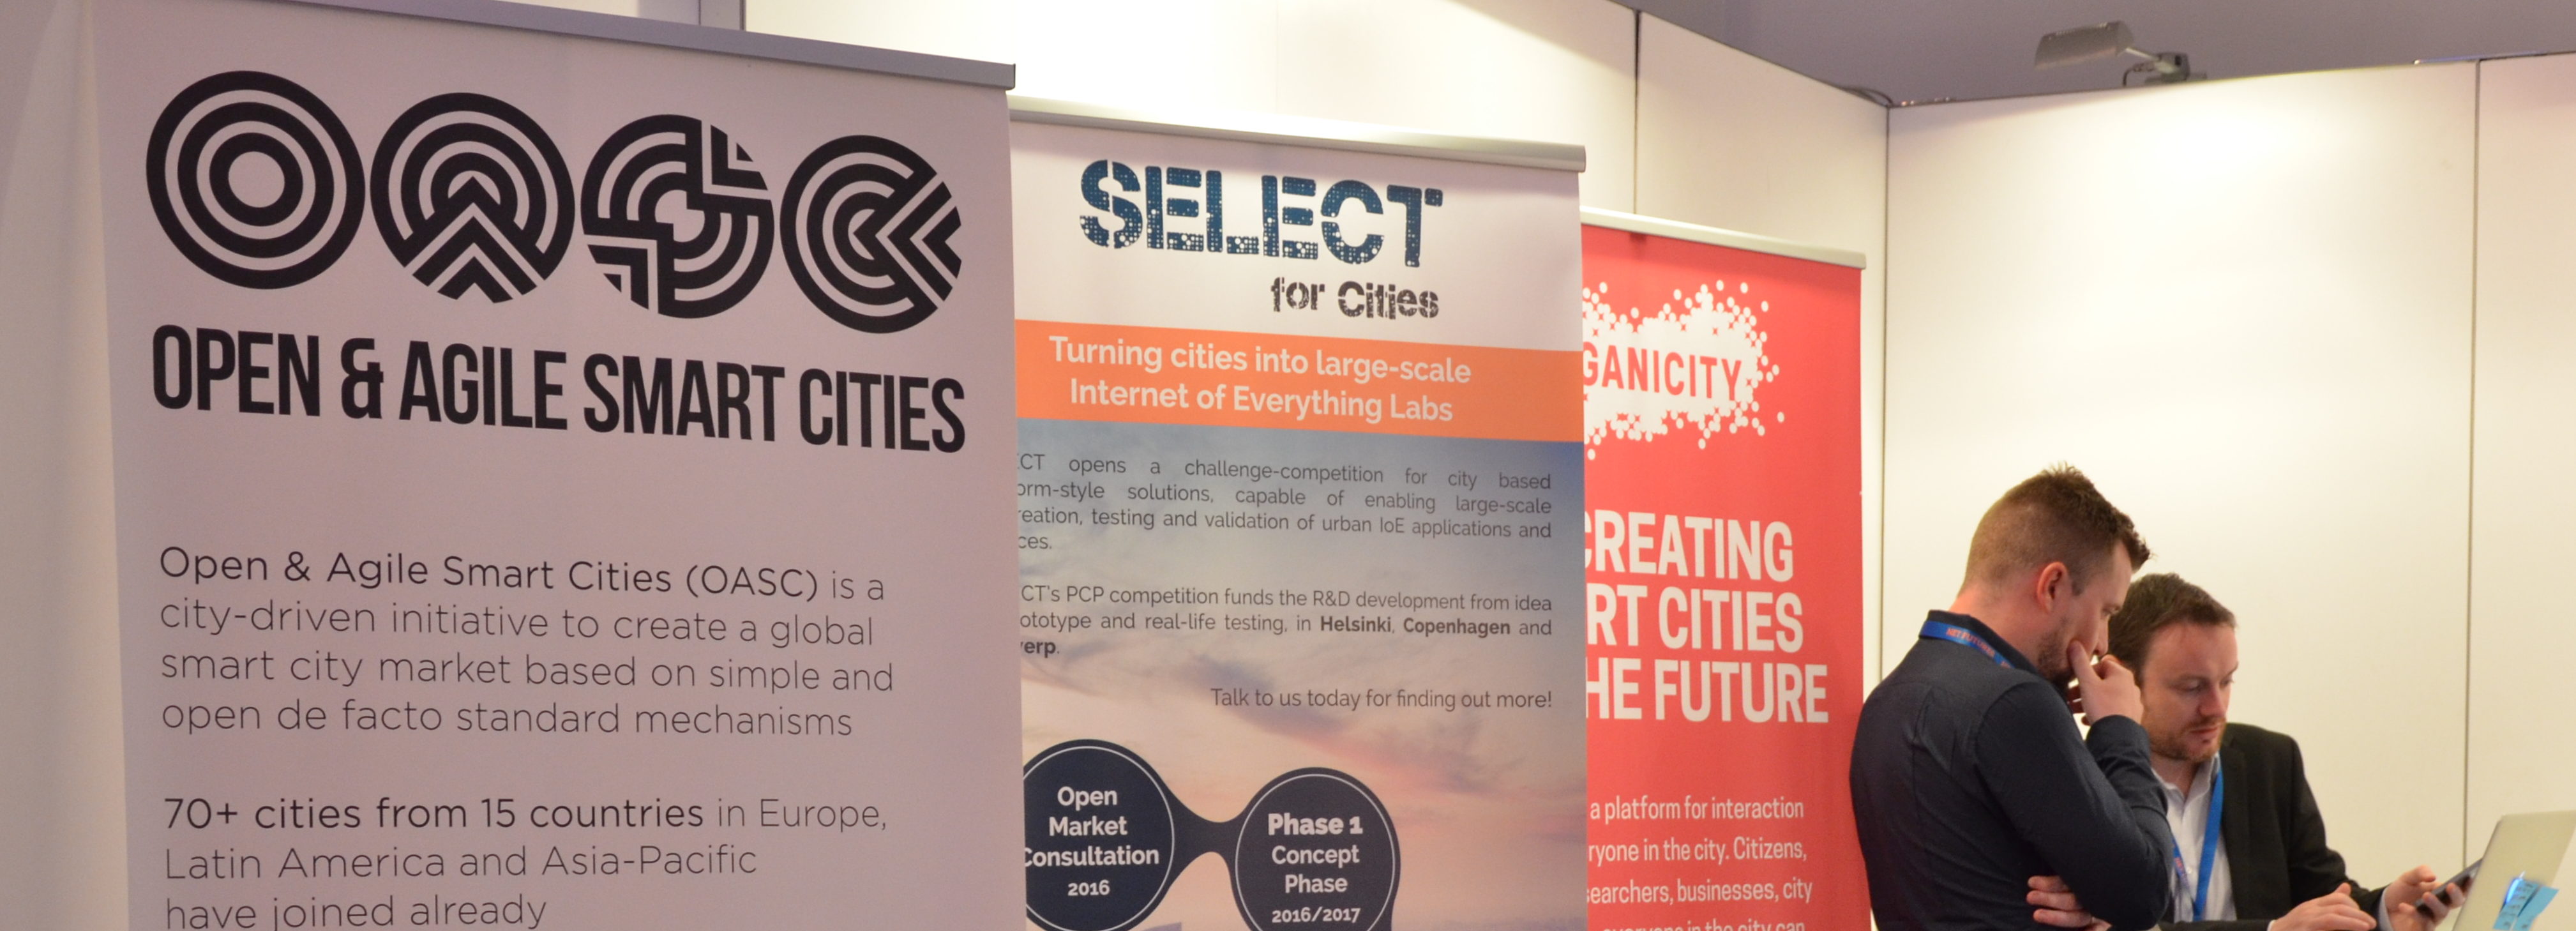 SELECT for Cities launches Open Consultation on IoT